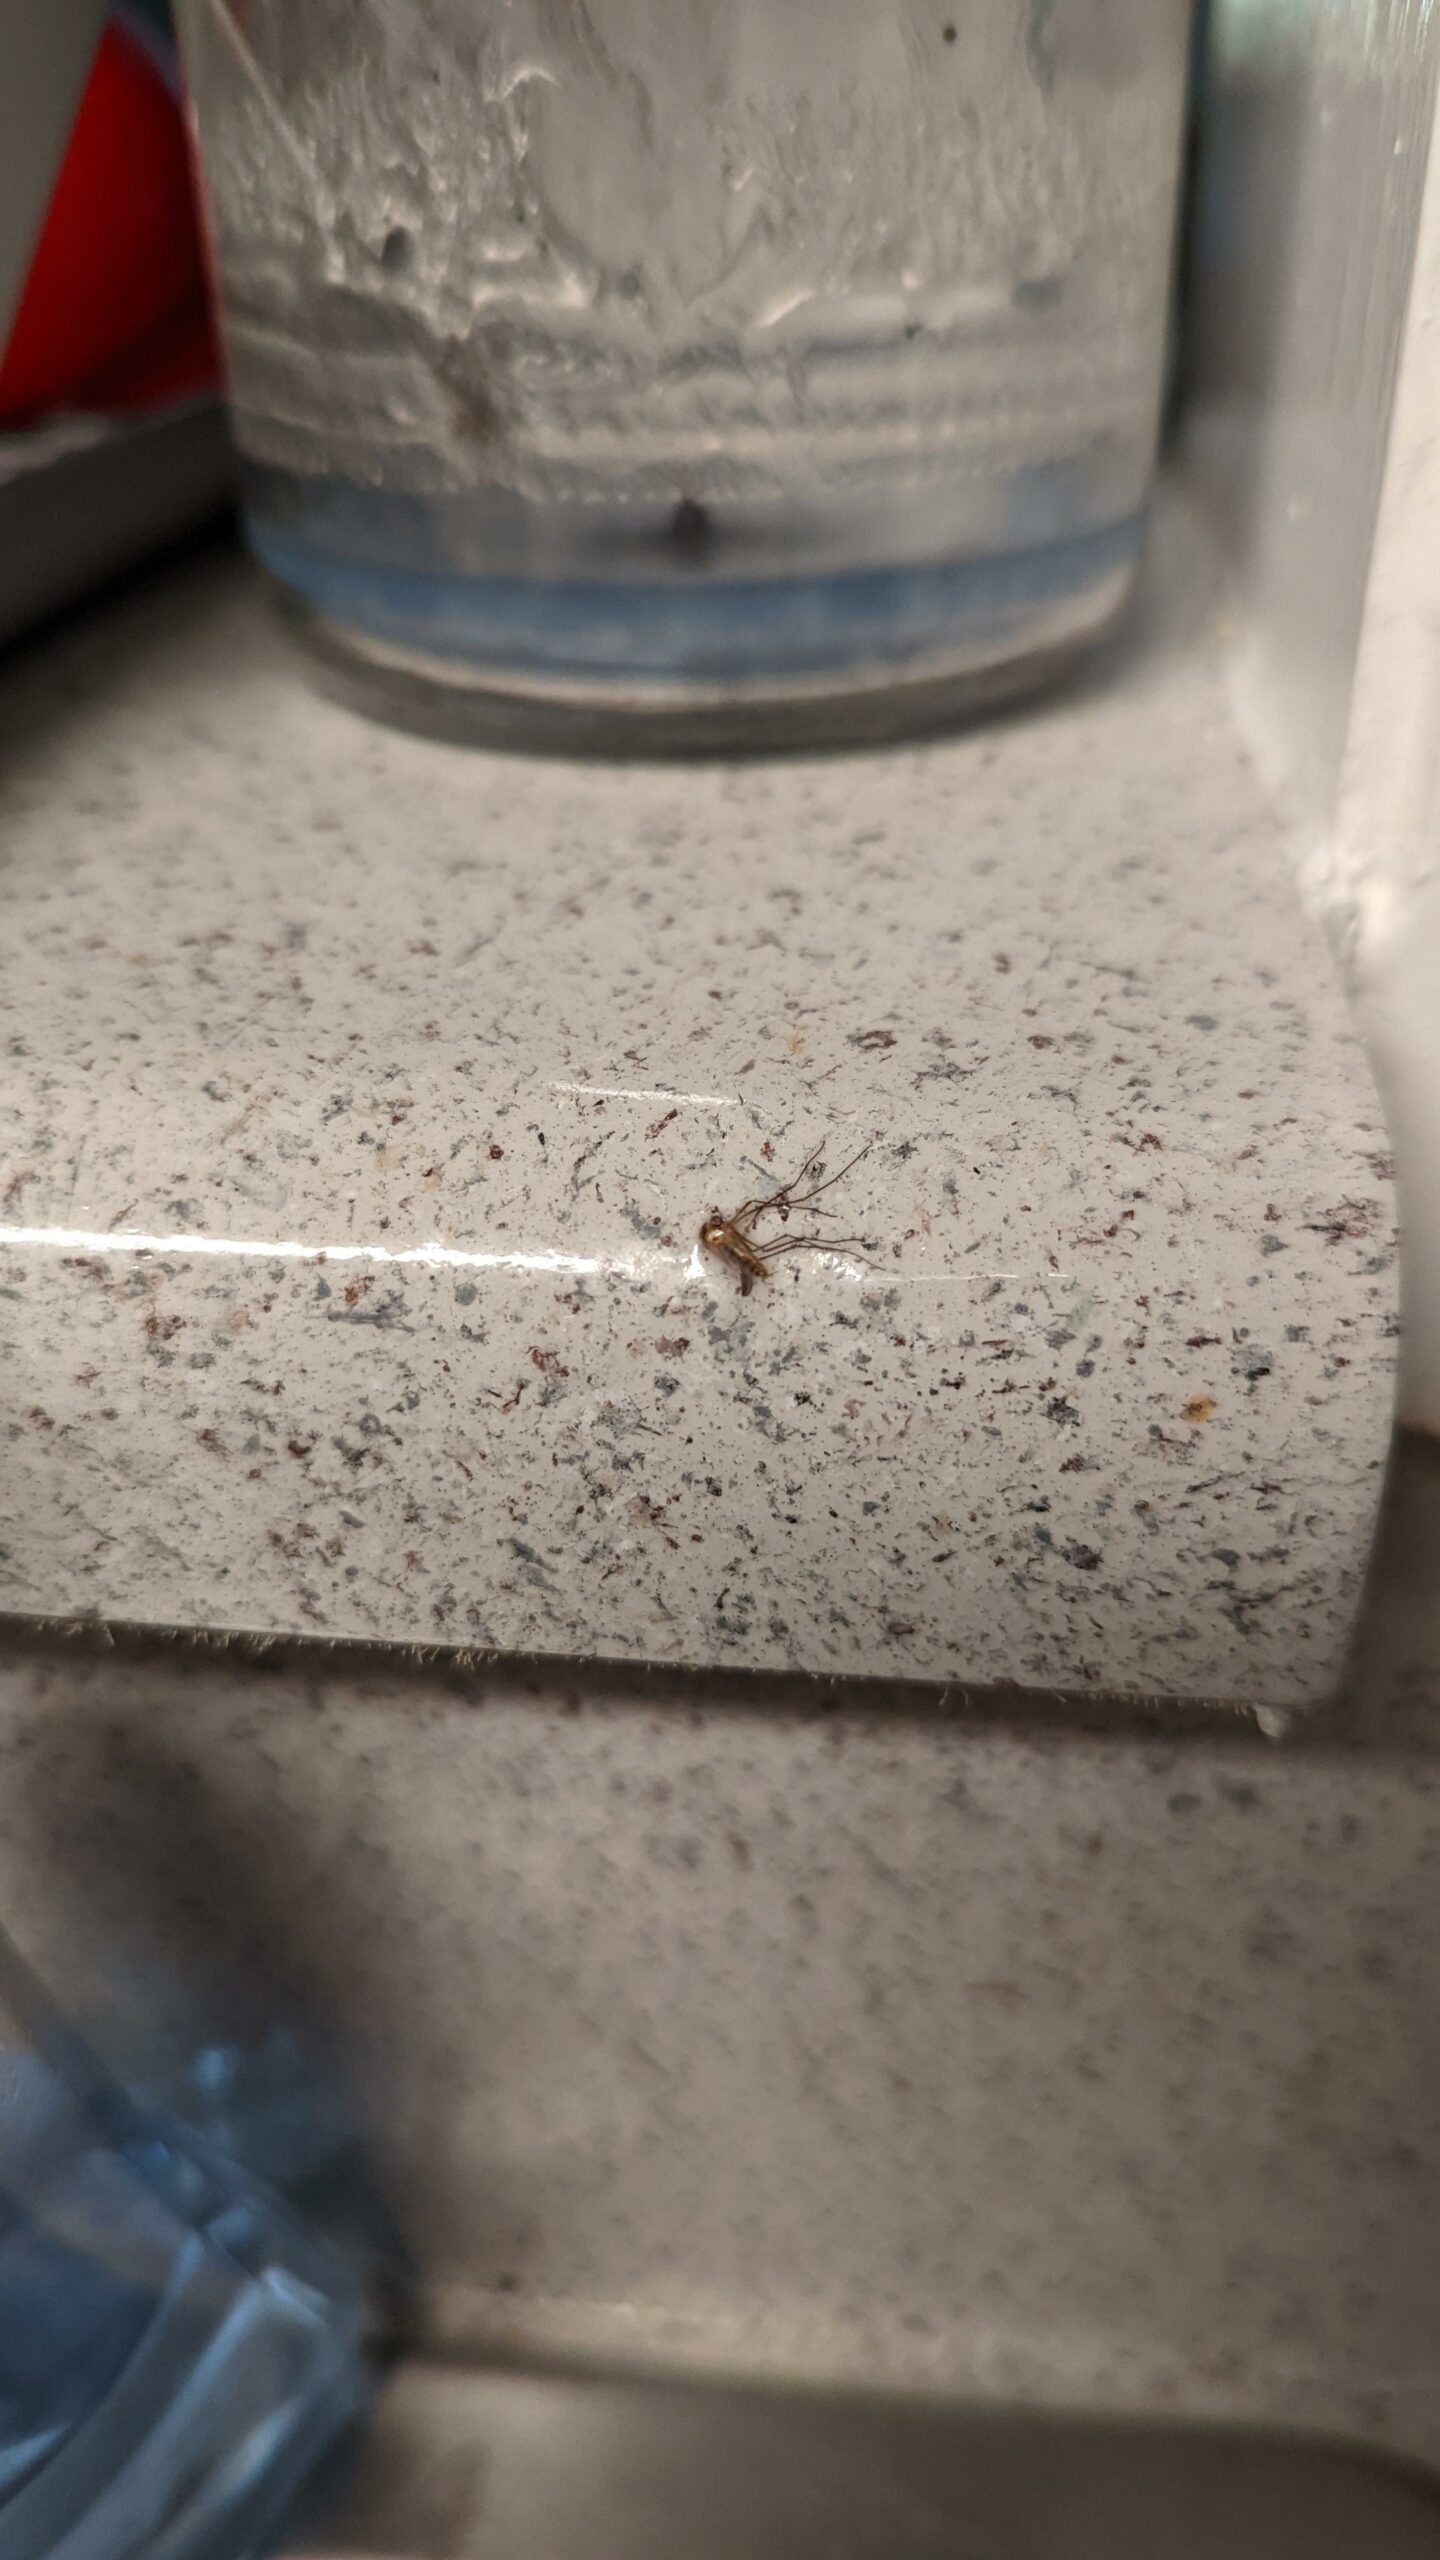 “Landlord renovation special, mosquito sealed under countertop epoxy.”